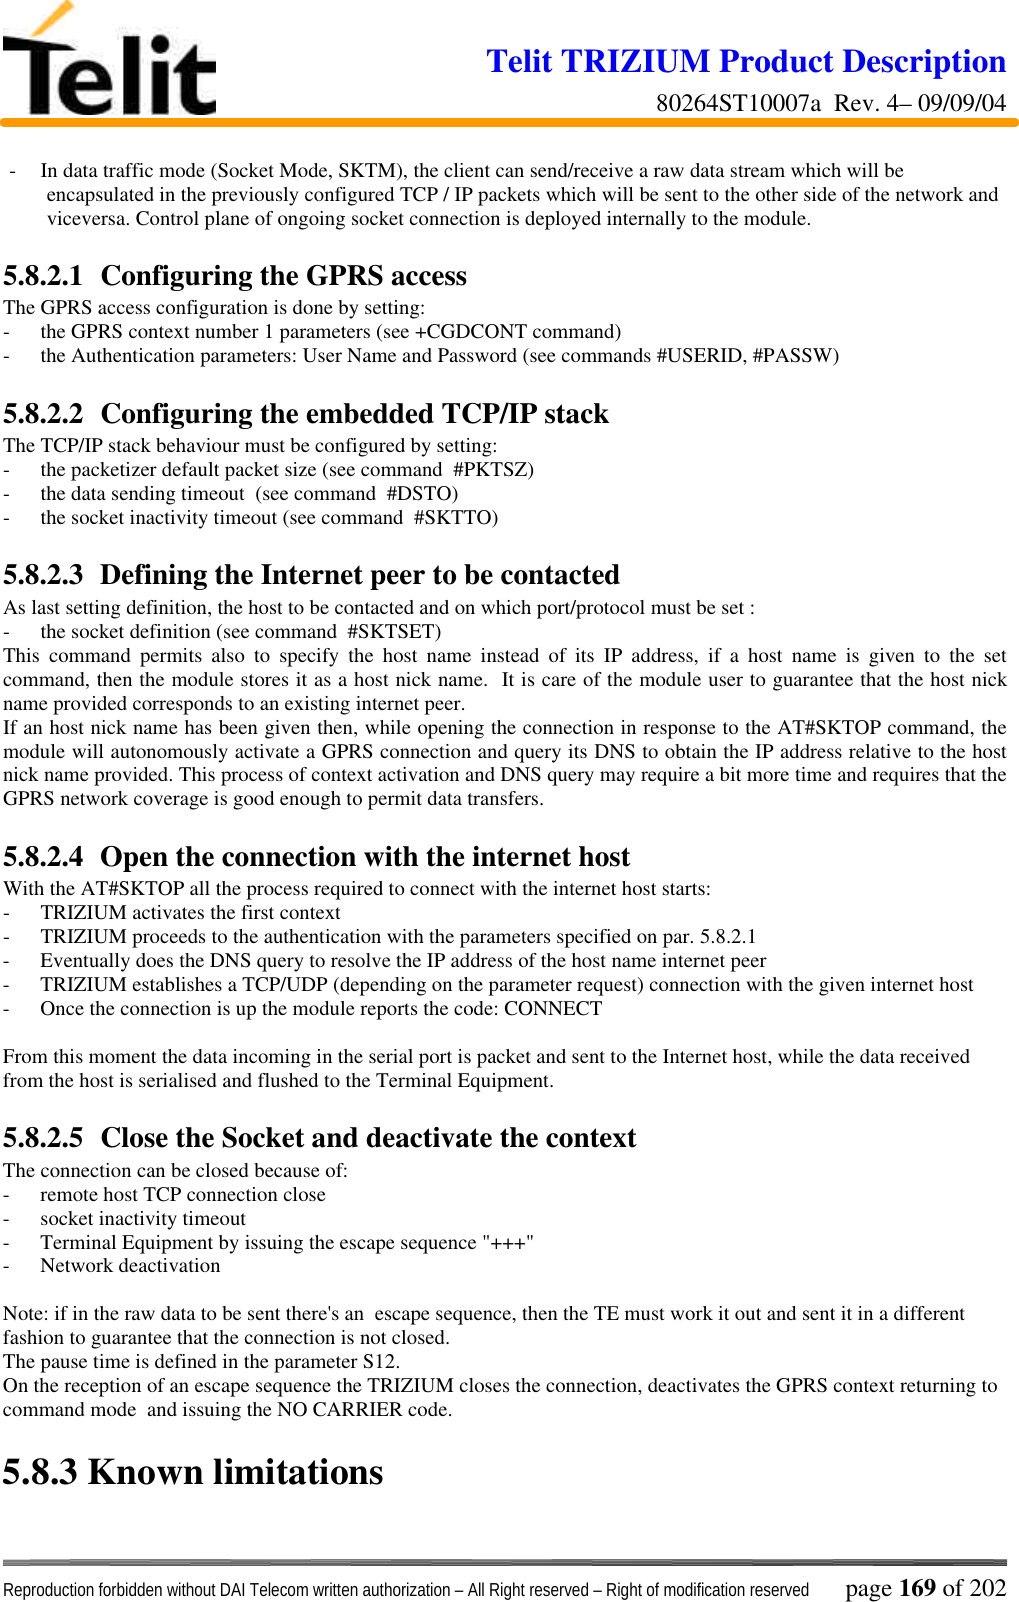 Telit TRIZIUM Product Description80264ST10007a  Rev. 4– 09/09/04Reproduction forbidden without DAI Telecom written authorization – All Right reserved – Right of modification reserved page 169 of 202- In data traffic mode (Socket Mode, SKTM), the client can send/receive a raw data stream which will beencapsulated in the previously configured TCP / IP packets which will be sent to the other side of the network andviceversa. Control plane of ongoing socket connection is deployed internally to the module.5.8.2.1  Configuring the GPRS accessThe GPRS access configuration is done by setting:- the GPRS context number 1 parameters (see +CGDCONT command)- the Authentication parameters: User Name and Password (see commands #USERID, #PASSW)5.8.2.2  Configuring the embedded TCP/IP stackThe TCP/IP stack behaviour must be configured by setting:- the packetizer default packet size (see command  #PKTSZ)- the data sending timeout  (see command  #DSTO)- the socket inactivity timeout (see command  #SKTTO)5.8.2.3  Defining the Internet peer to be contactedAs last setting definition, the host to be contacted and on which port/protocol must be set :- the socket definition (see command  #SKTSET)This command permits also to specify the host name instead of its IP address, if a host name is given to the setcommand, then the module stores it as a host nick name.  It is care of the module user to guarantee that the host nickname provided corresponds to an existing internet peer.If an host nick name has been given then, while opening the connection in response to the AT#SKTOP command, themodule will autonomously activate a GPRS connection and query its DNS to obtain the IP address relative to the hostnick name provided. This process of context activation and DNS query may require a bit more time and requires that theGPRS network coverage is good enough to permit data transfers.5.8.2.4  Open the connection with the internet hostWith the AT#SKTOP all the process required to connect with the internet host starts:- TRIZIUM activates the first context- TRIZIUM proceeds to the authentication with the parameters specified on par. 5.8.2.1- Eventually does the DNS query to resolve the IP address of the host name internet peer- TRIZIUM establishes a TCP/UDP (depending on the parameter request) connection with the given internet host- Once the connection is up the module reports the code: CONNECTFrom this moment the data incoming in the serial port is packet and sent to the Internet host, while the data receivedfrom the host is serialised and flushed to the Terminal Equipment.5.8.2.5  Close the Socket and deactivate the contextThe connection can be closed because of:- remote host TCP connection close- socket inactivity timeout- Terminal Equipment by issuing the escape sequence &quot;+++&quot;- Network deactivationNote: if in the raw data to be sent there&apos;s an  escape sequence, then the TE must work it out and sent it in a differentfashion to guarantee that the connection is not closed.The pause time is defined in the parameter S12.On the reception of an escape sequence the TRIZIUM closes the connection, deactivates the GPRS context returning tocommand mode  and issuing the NO CARRIER code.5.8.3  Known limitations